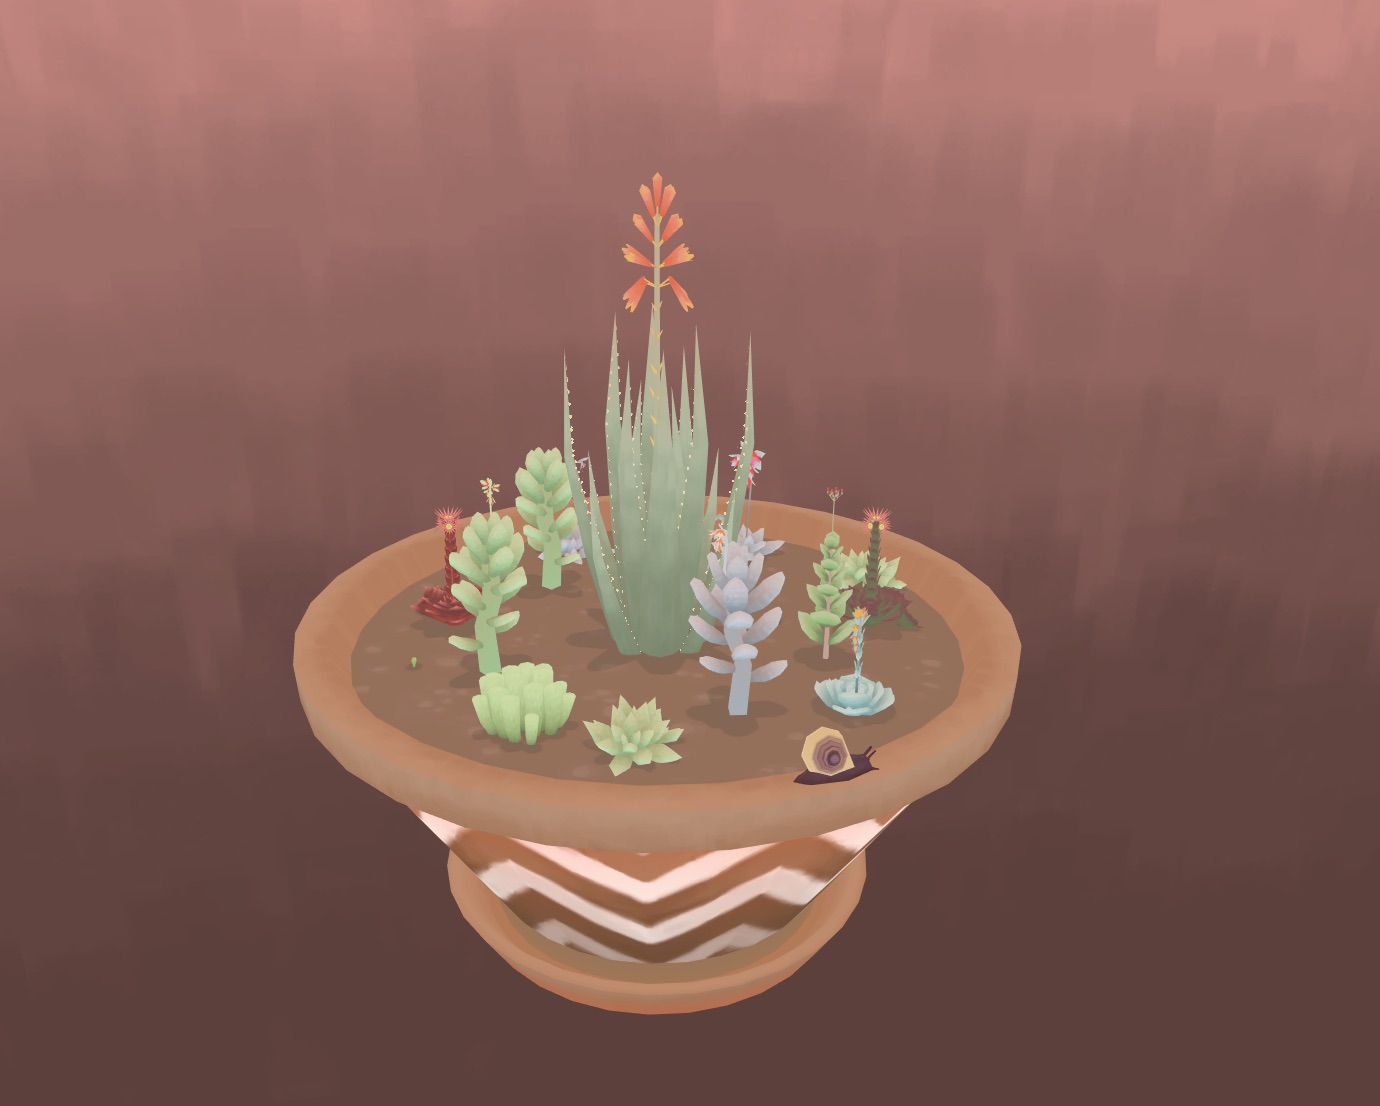 Pequod, a virtual succulent from the game Viridi